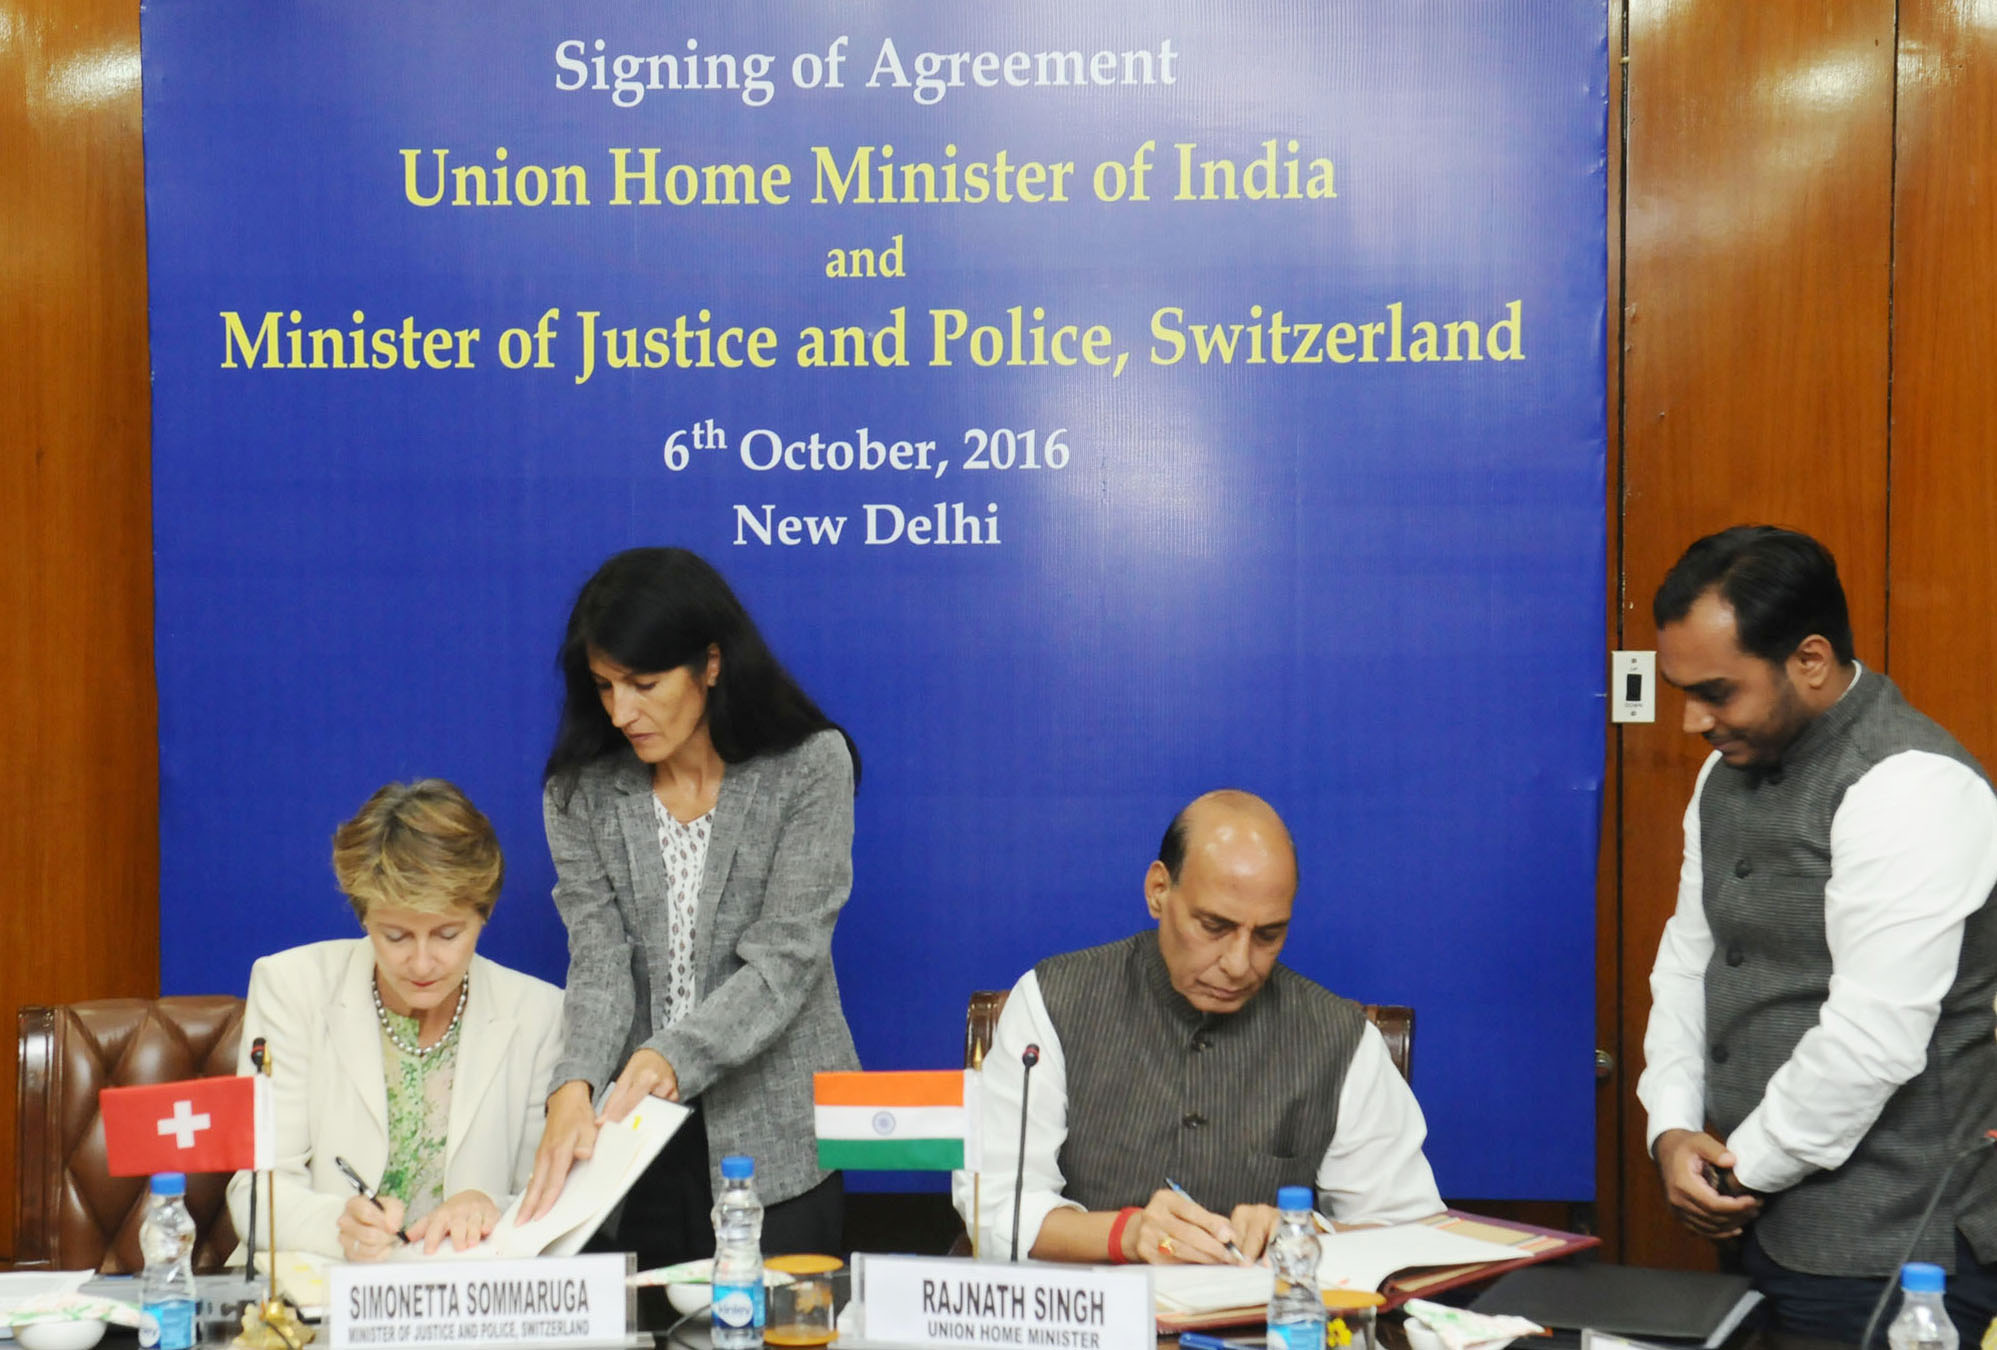 The Union Home Minister, Shri Rajnath Singh and the Minister for Justice and Police of Swiss Confederation, Ms. Simonetta Sommaruga signing an Agreement, in New Delhi on October 06, 2016.